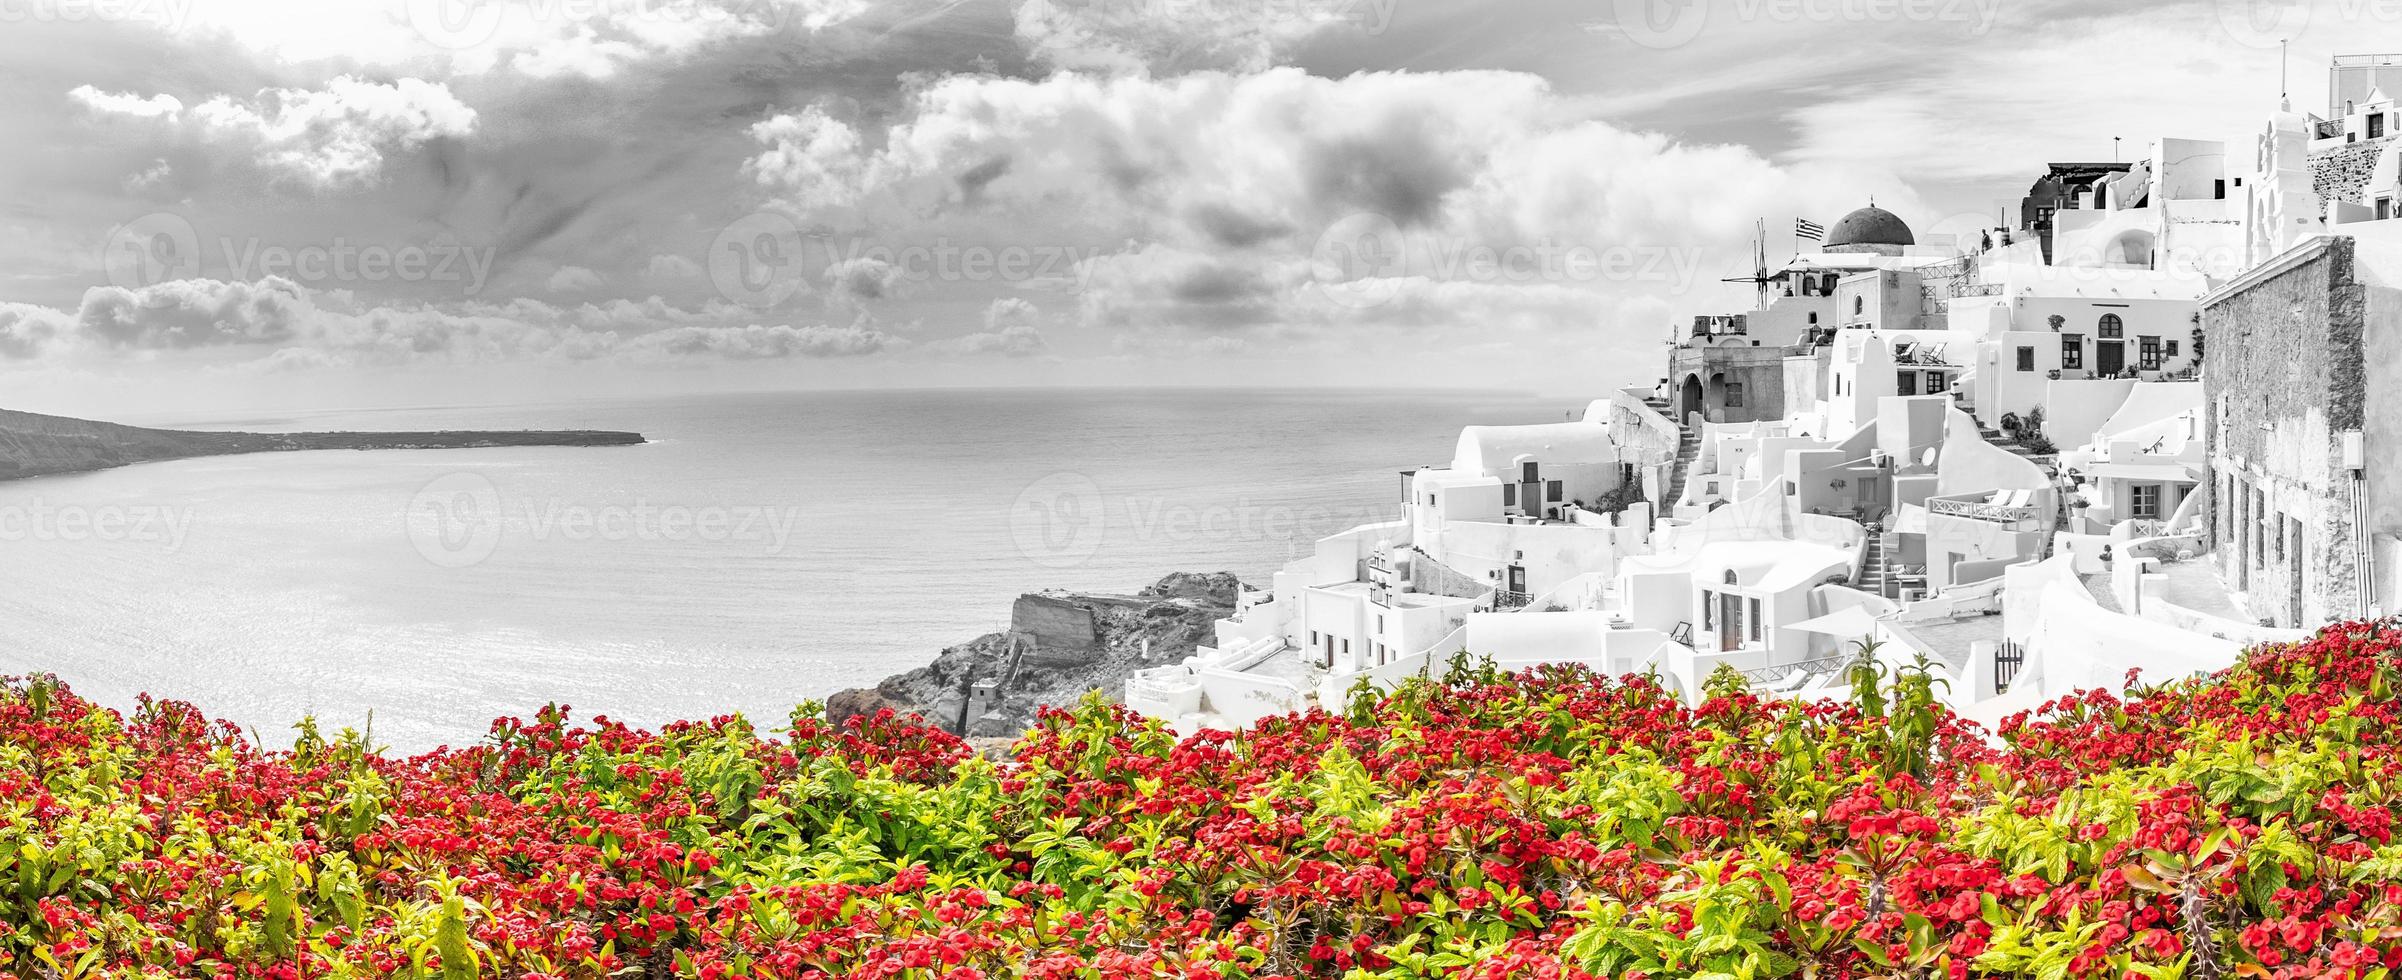 Red flowers on the street, isolated red color on black and white background in Santorini, Greece, beautiful abstract landscape, dramatic sky over famous travel destination. Artistic vacation photo